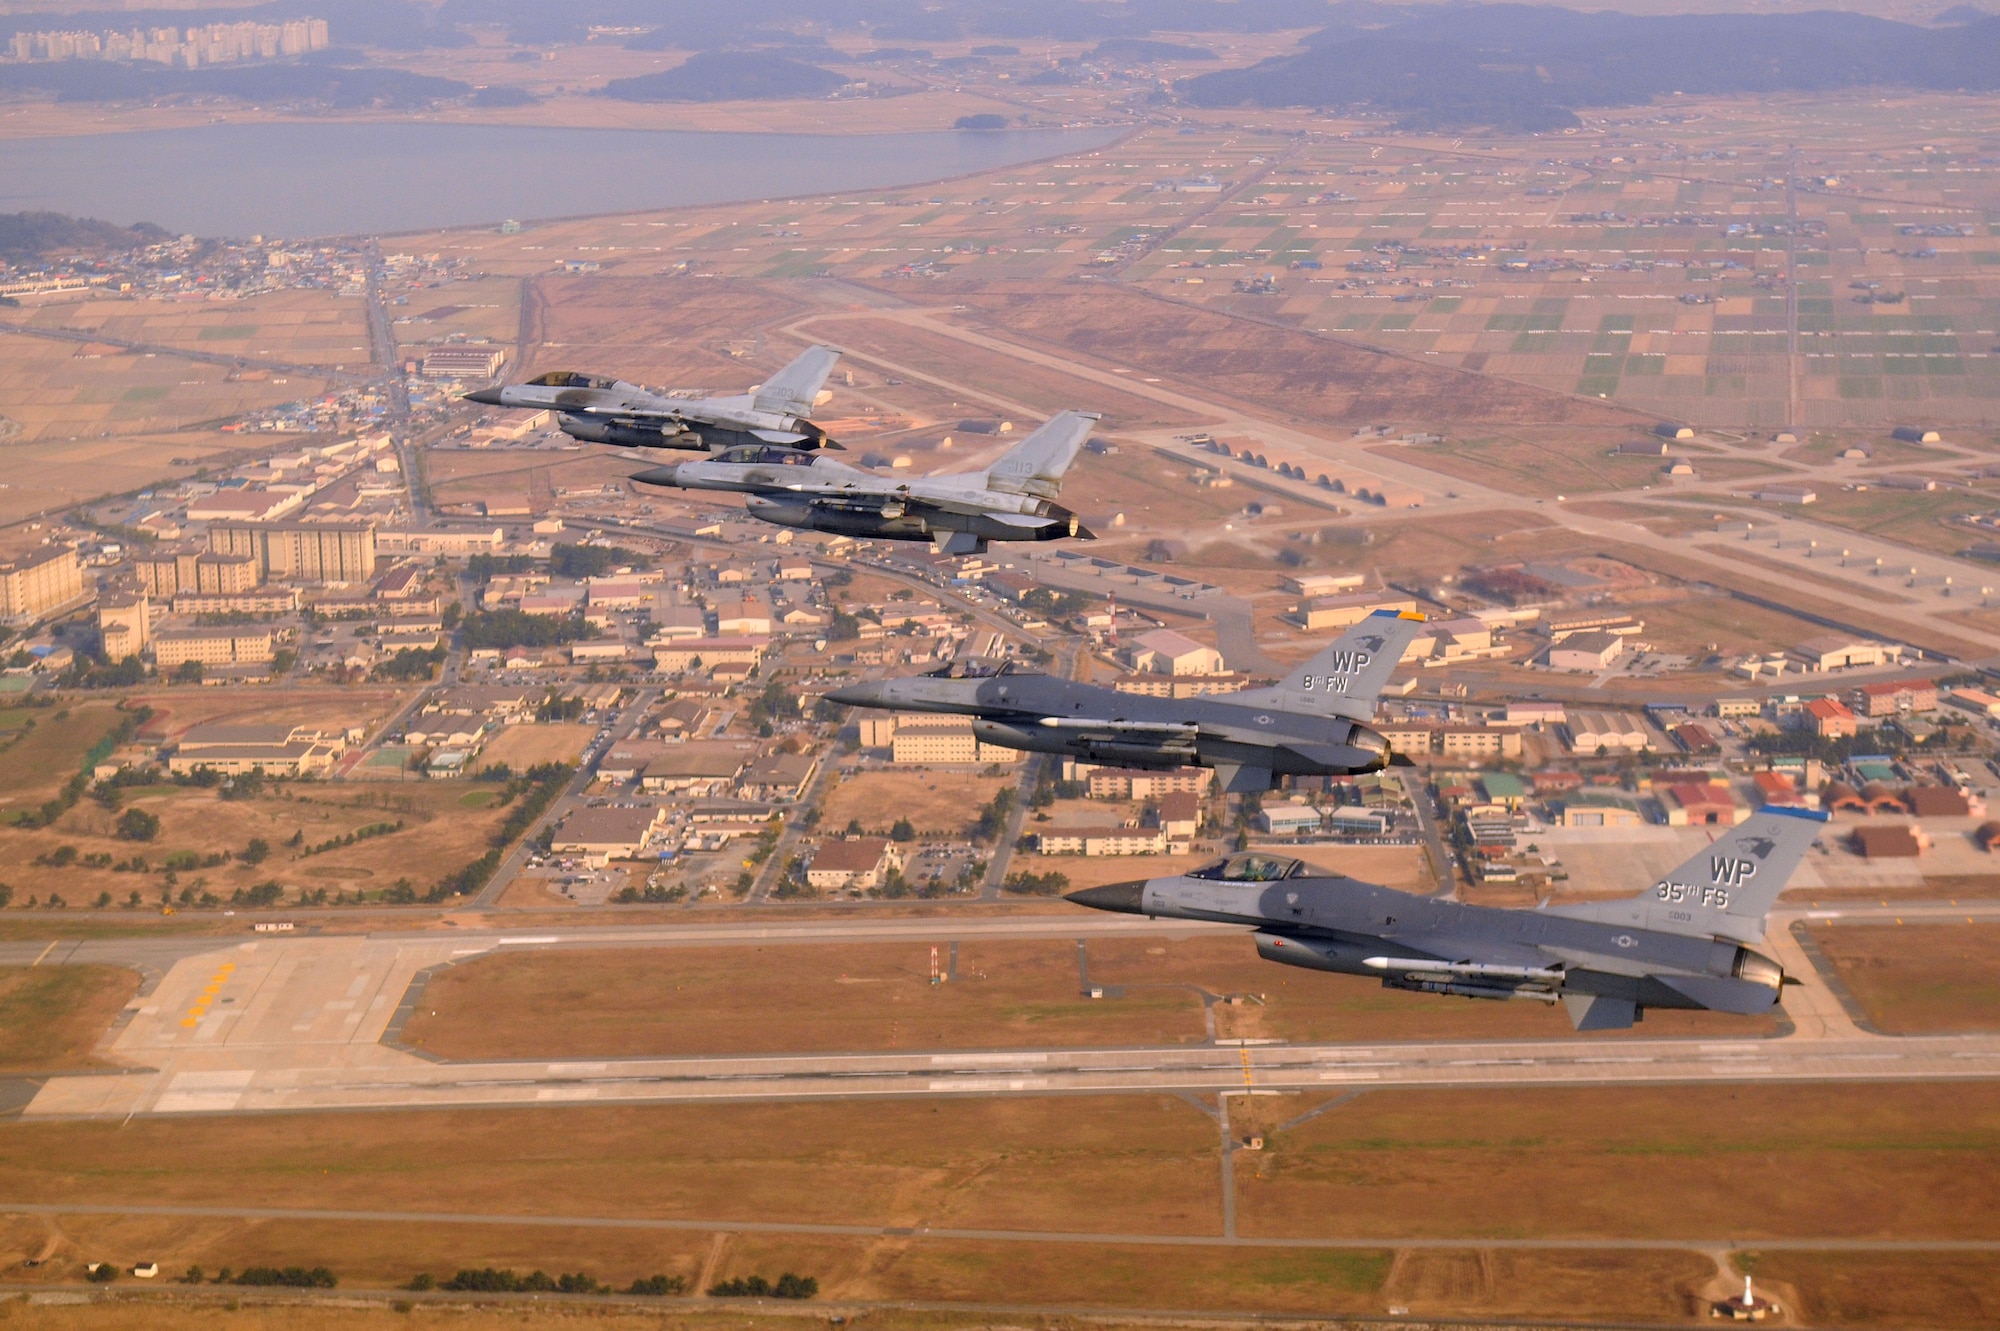 KUNSAN AIR BASE, Republic of Korea -- Four F-16 Fighting Falcons fly over Kunsan AB during a U.S. and Republic of Korea Air Force Coalition flight Nov. 10 in celebration of the 60th anniversary of the Korean War. (U.S. Air Force photo/Master Sgt. Jason Wilkerson)